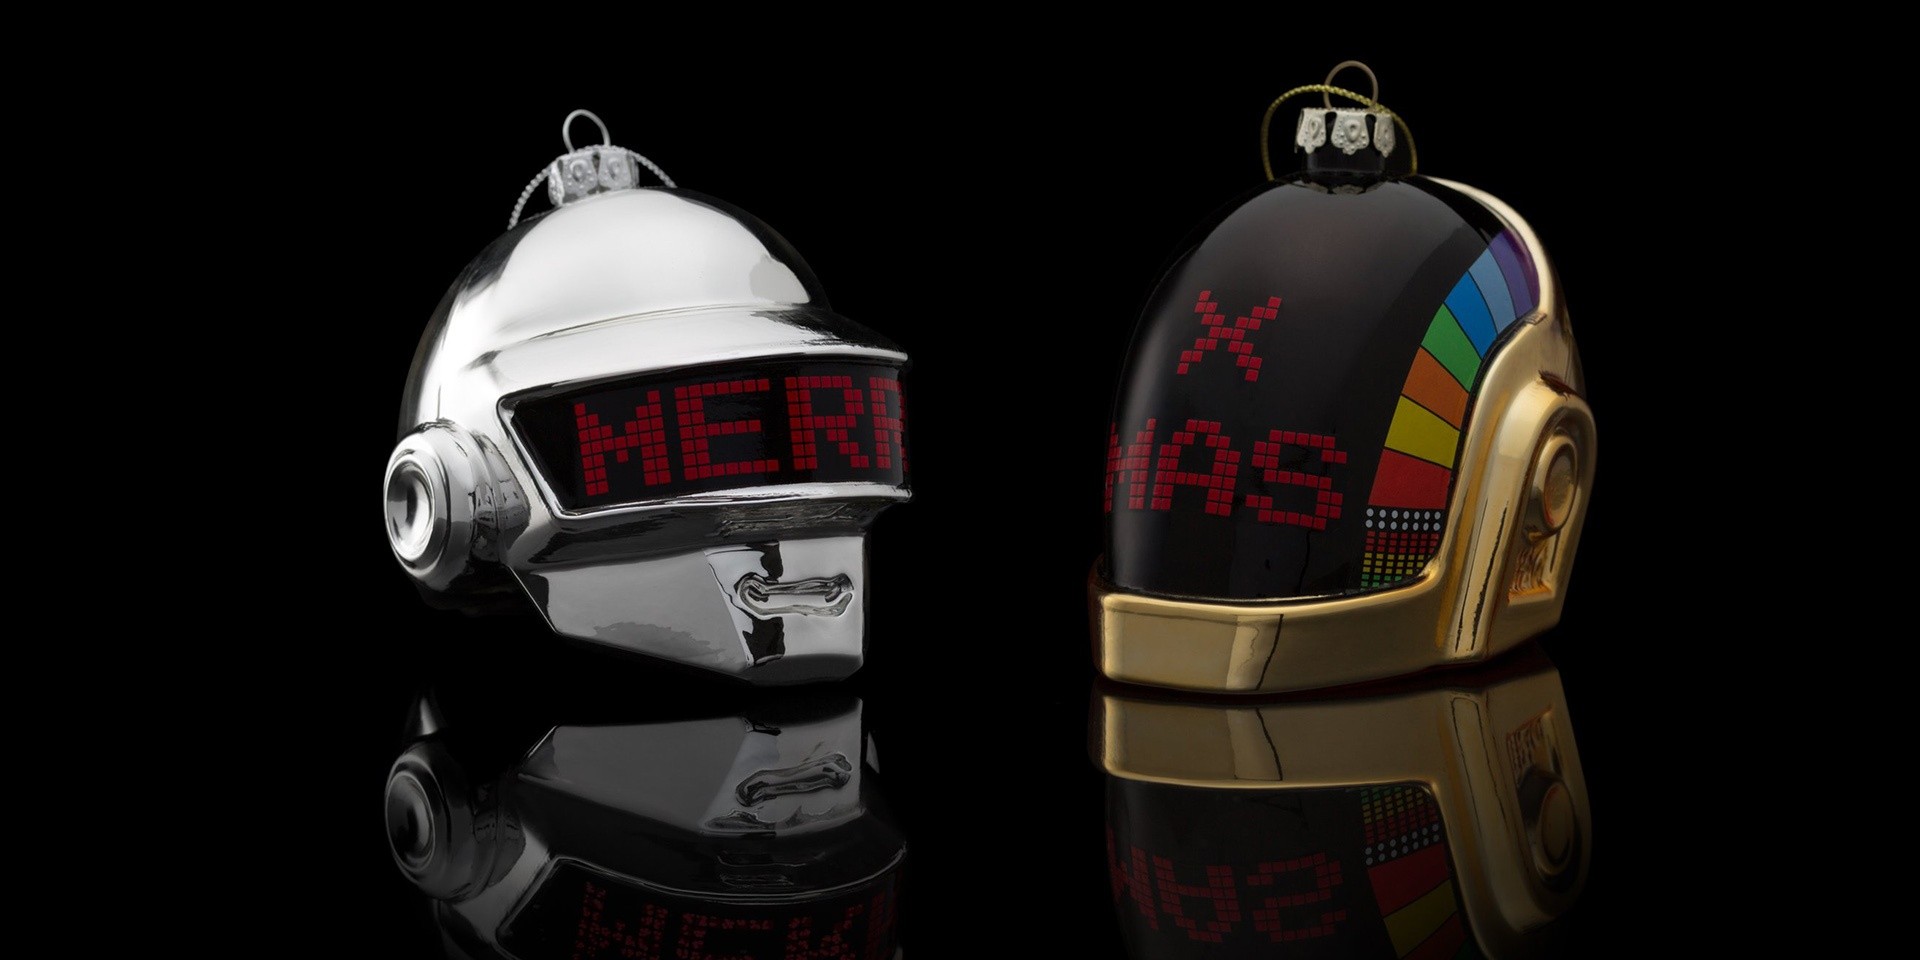 You'll want Daft Punk's holiday merch collection for Christmas